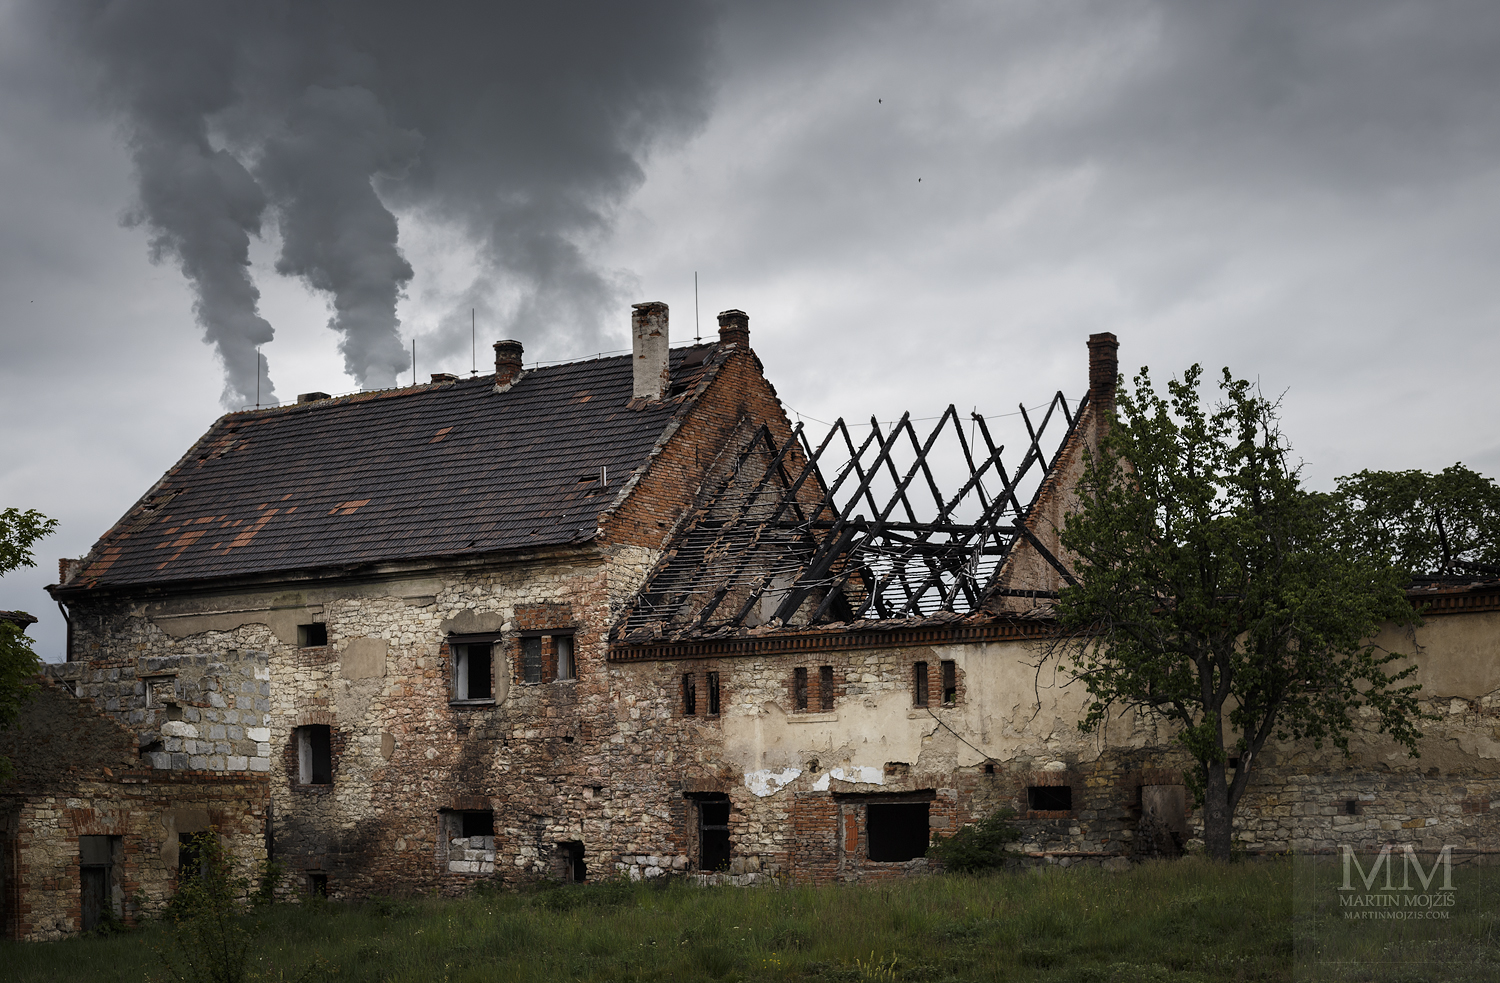 Fine Art photograph of the old house. Martin Mojzis.